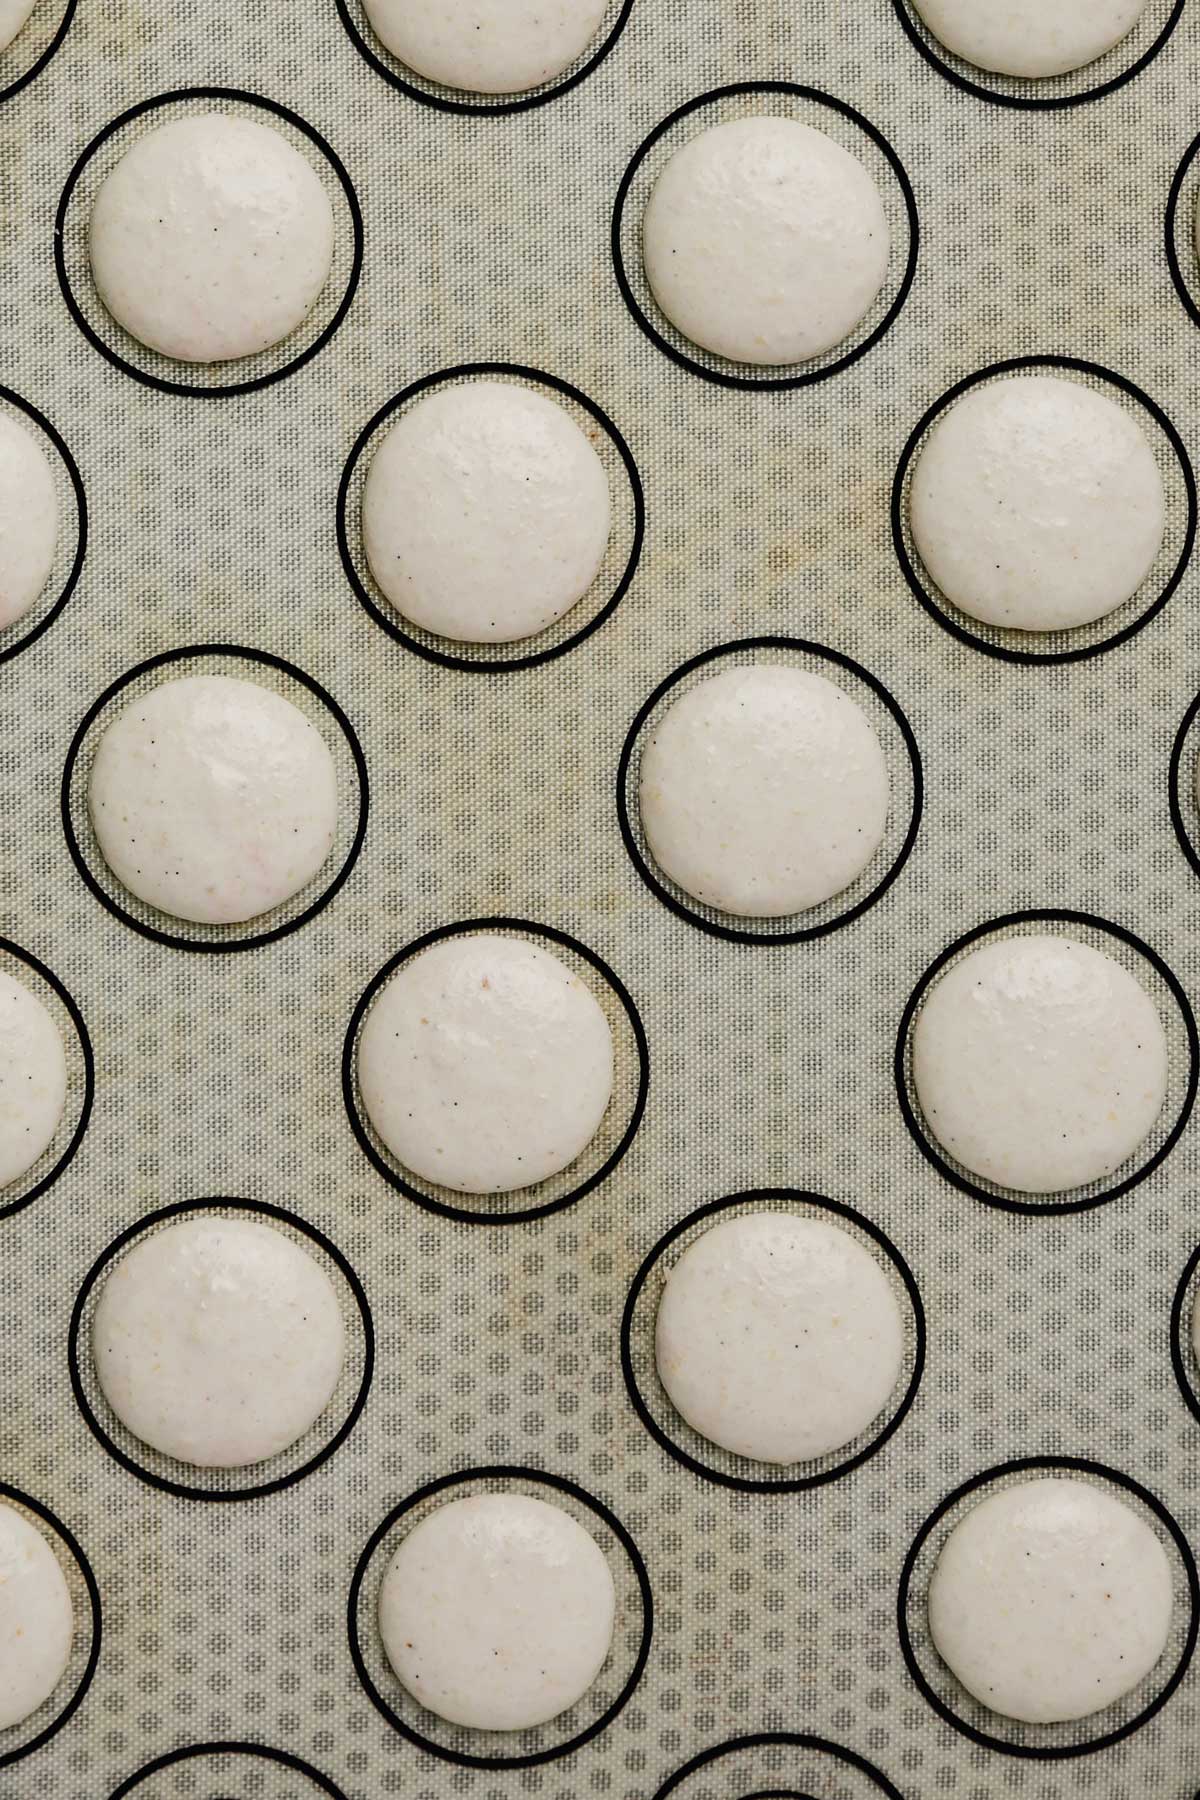 Piped macarons on a mat